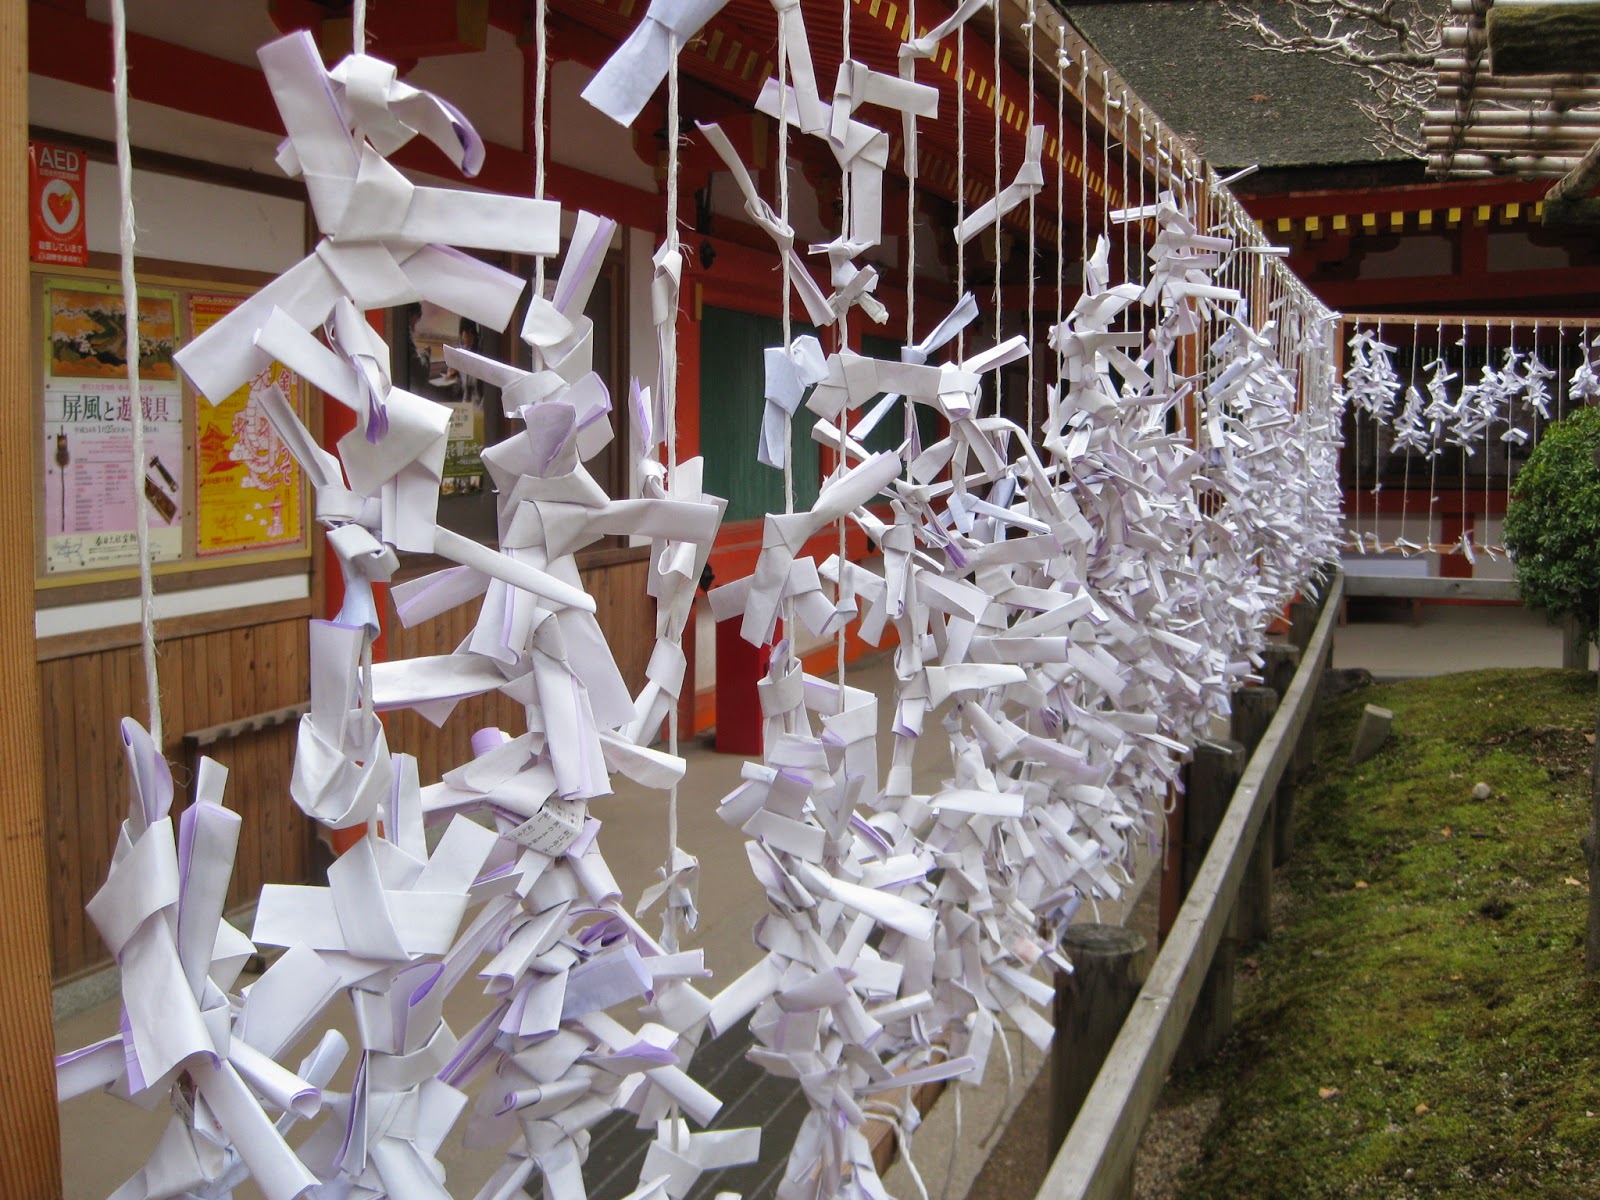 Kyoto - Tie the paper to promote good fortune